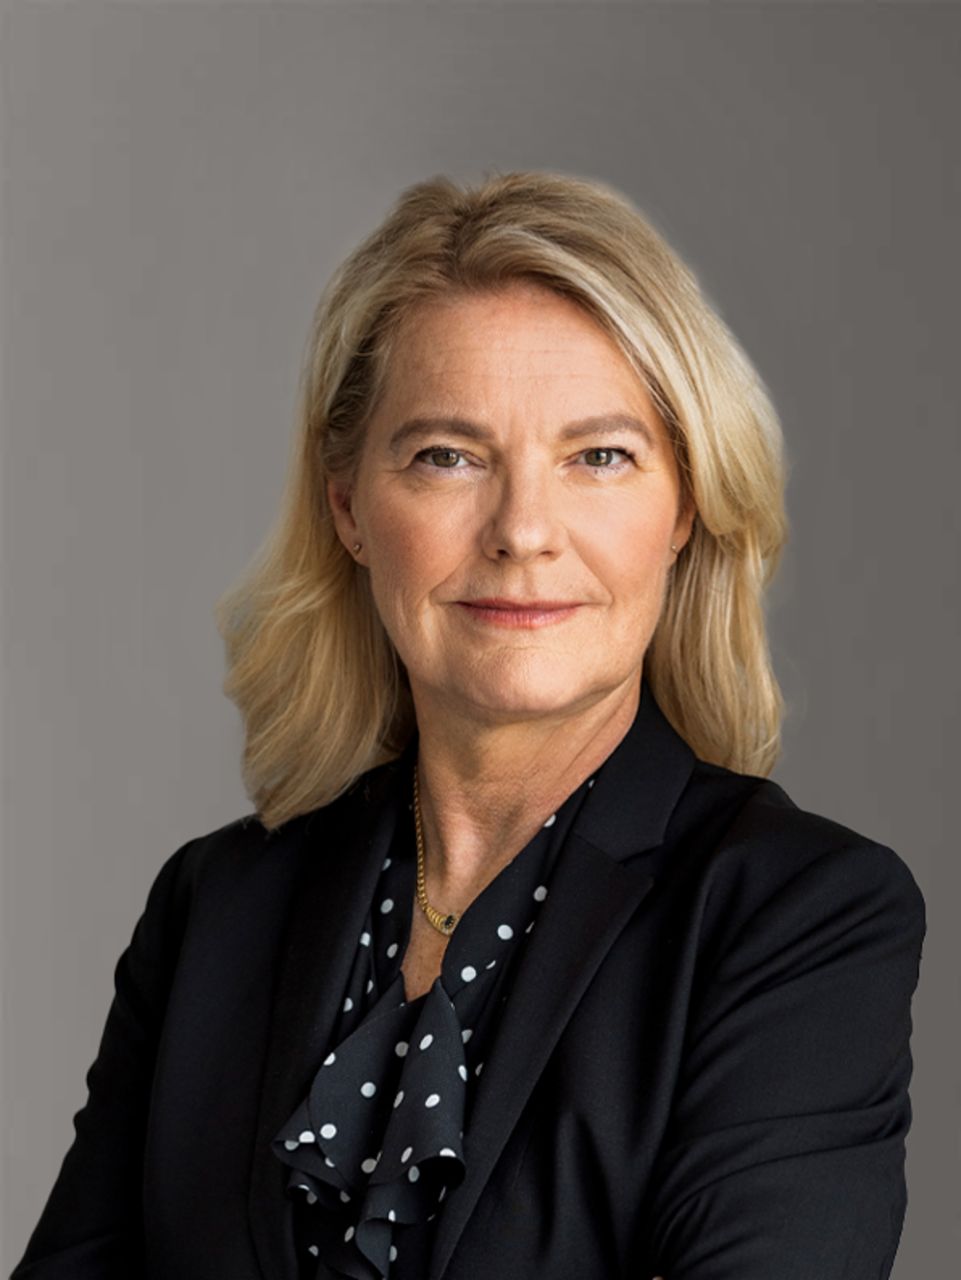 Portrait of Catharina Modahl Nilsson, Member of the Executive Board of TRATON SE, responsible for TRATON Group Product Management